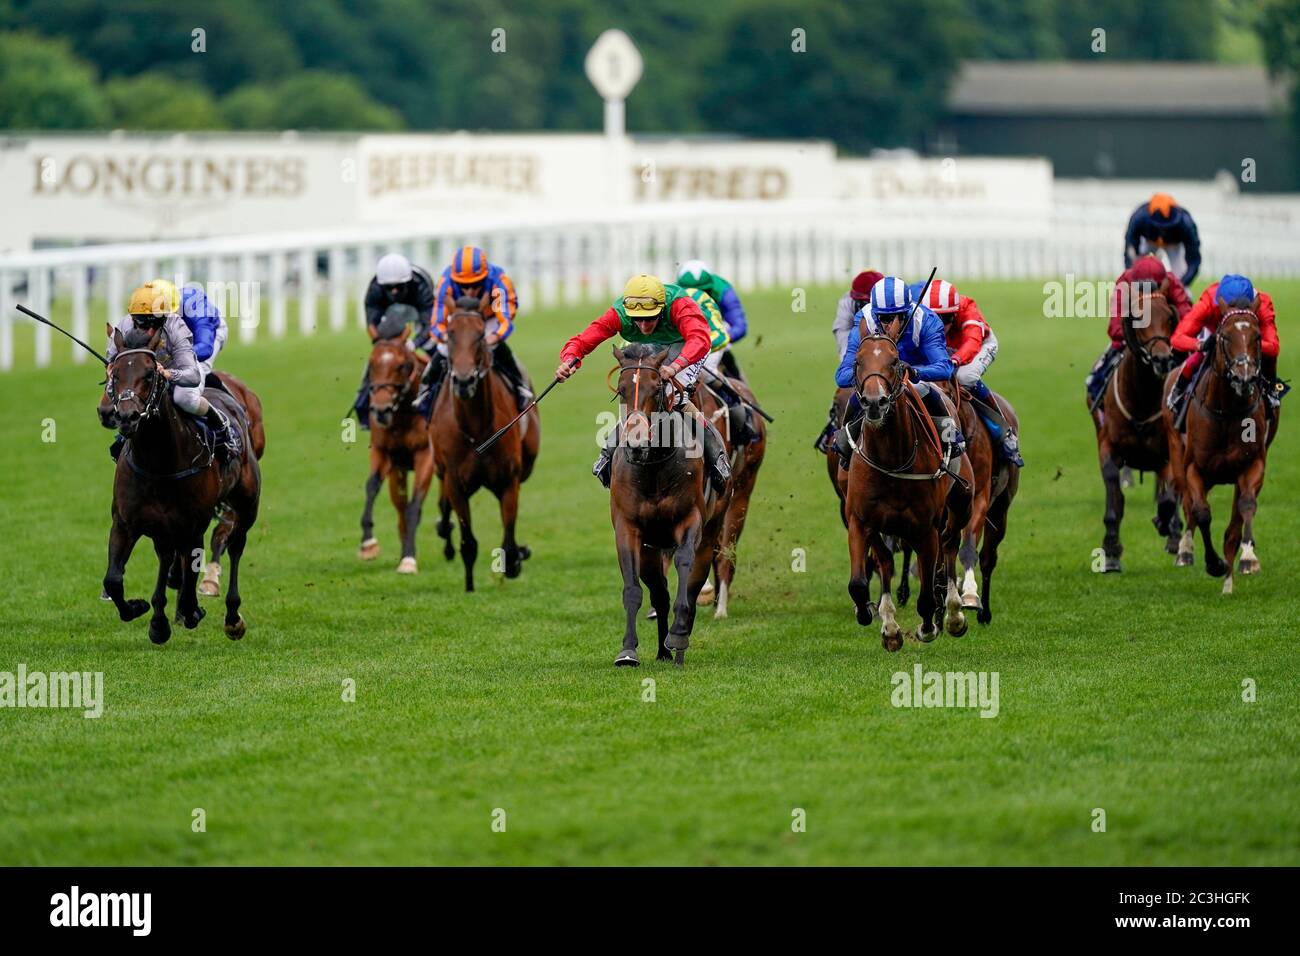 Nando Parrado ridden by Adam Kirby (centre) wins the Coventry Stakes during day five of Royal Ascot at Ascot Racecourse. Stock Photo